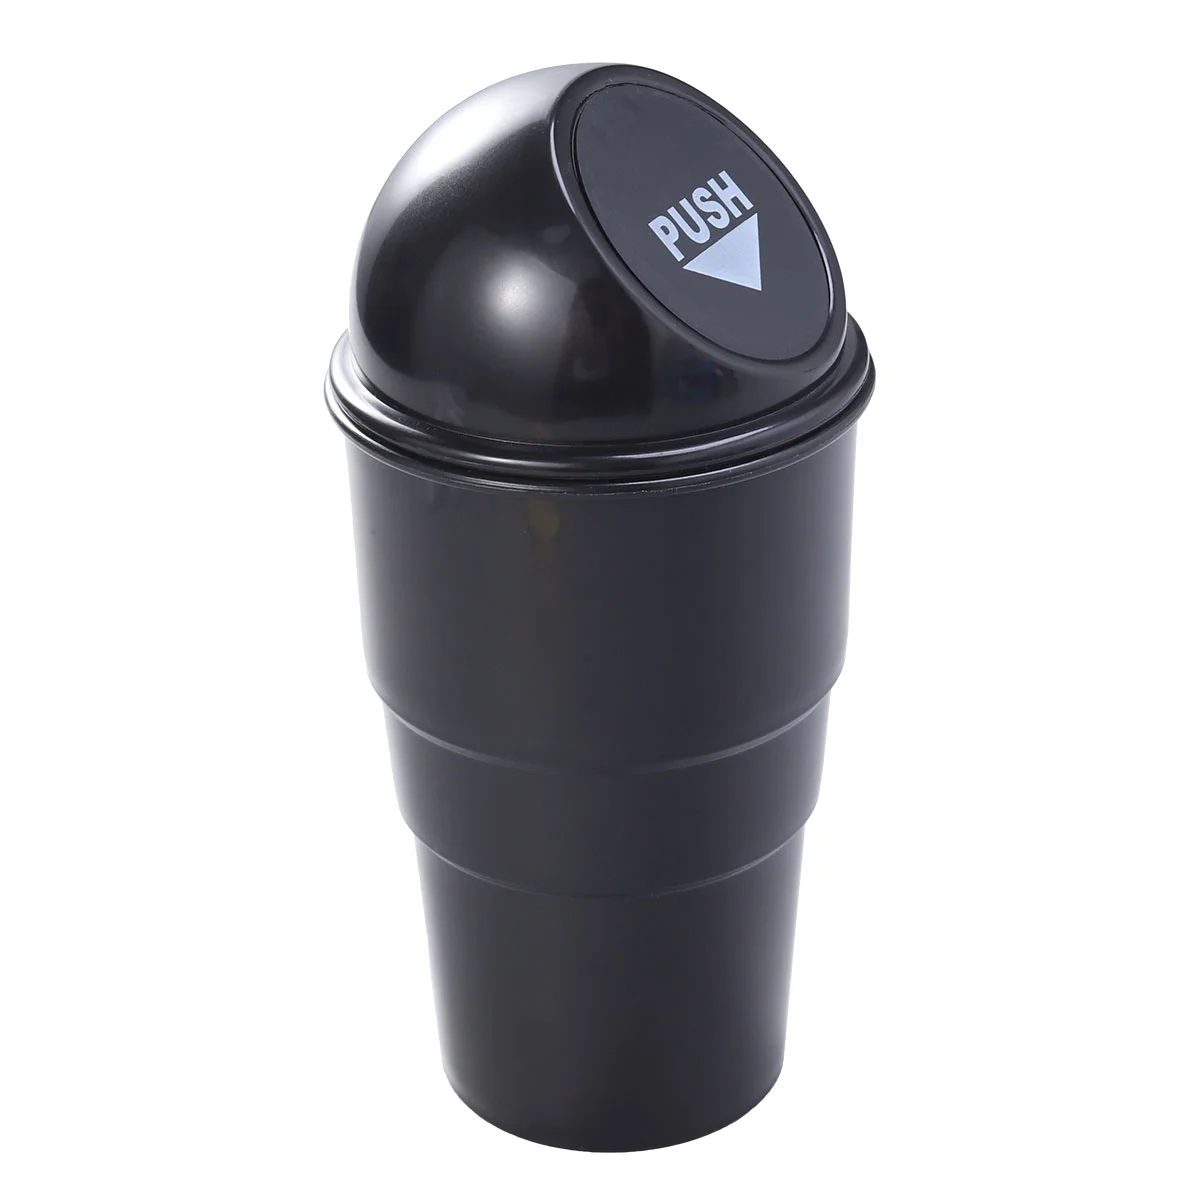 

Car Trash Can With Lid Garbage Dust Bin Storage Barrel Fits Cup Holder In Console Or Door (Black)